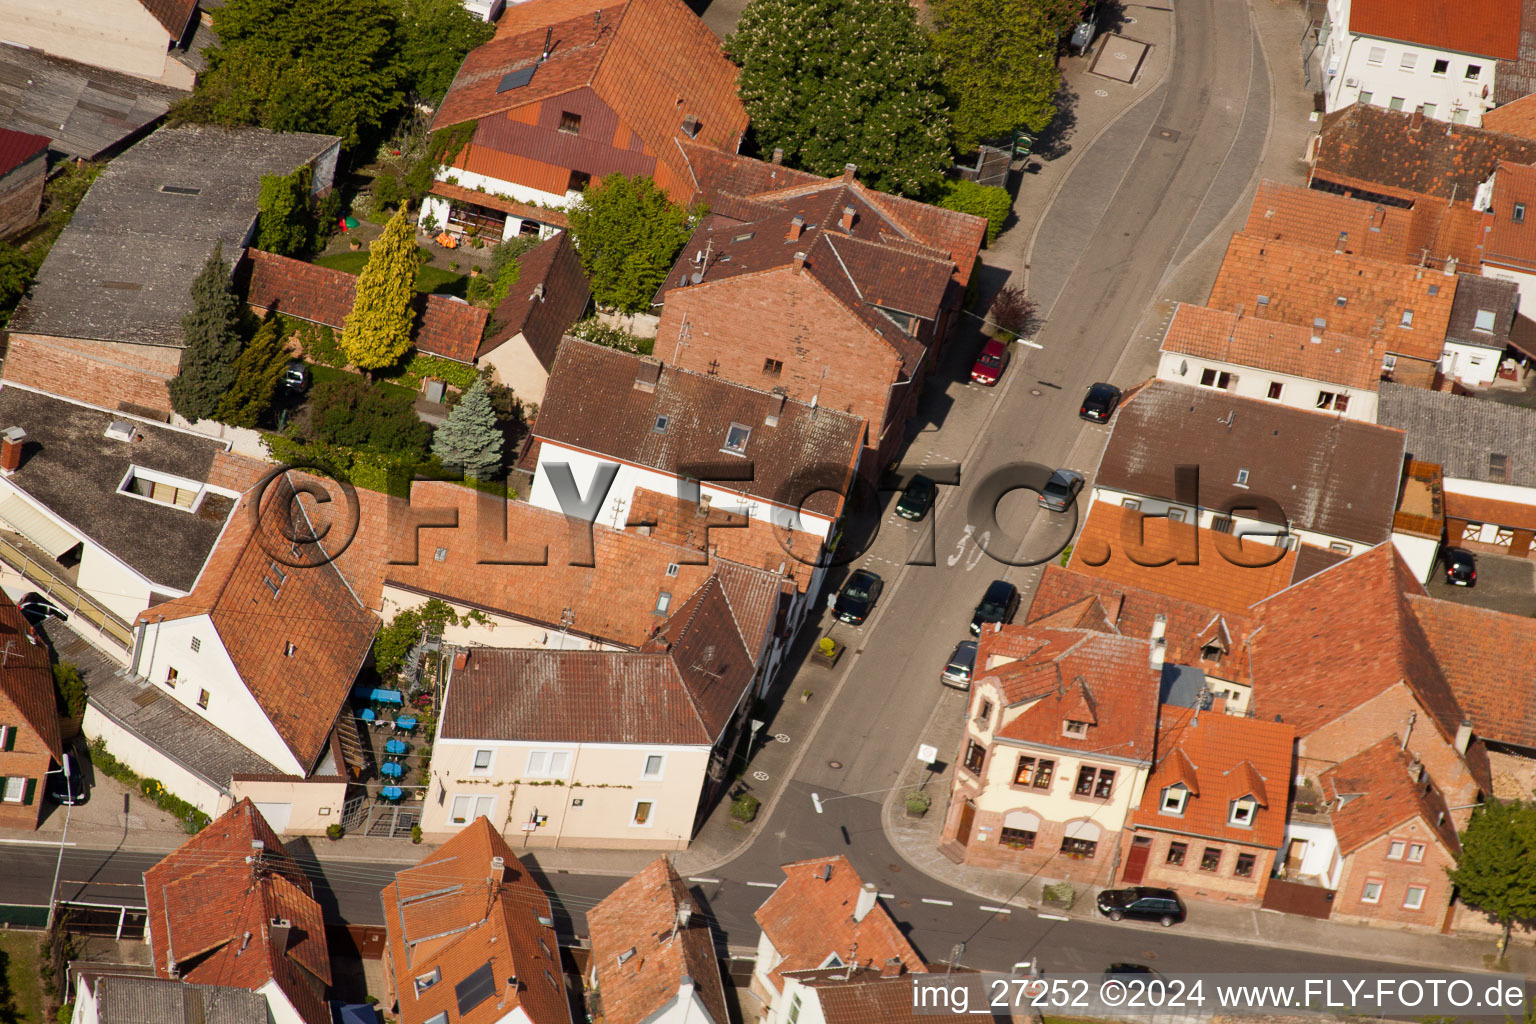 Aerial photograpy of To the corner in the district Wollmesheim in Landau in der Pfalz in the state Rhineland-Palatinate, Germany